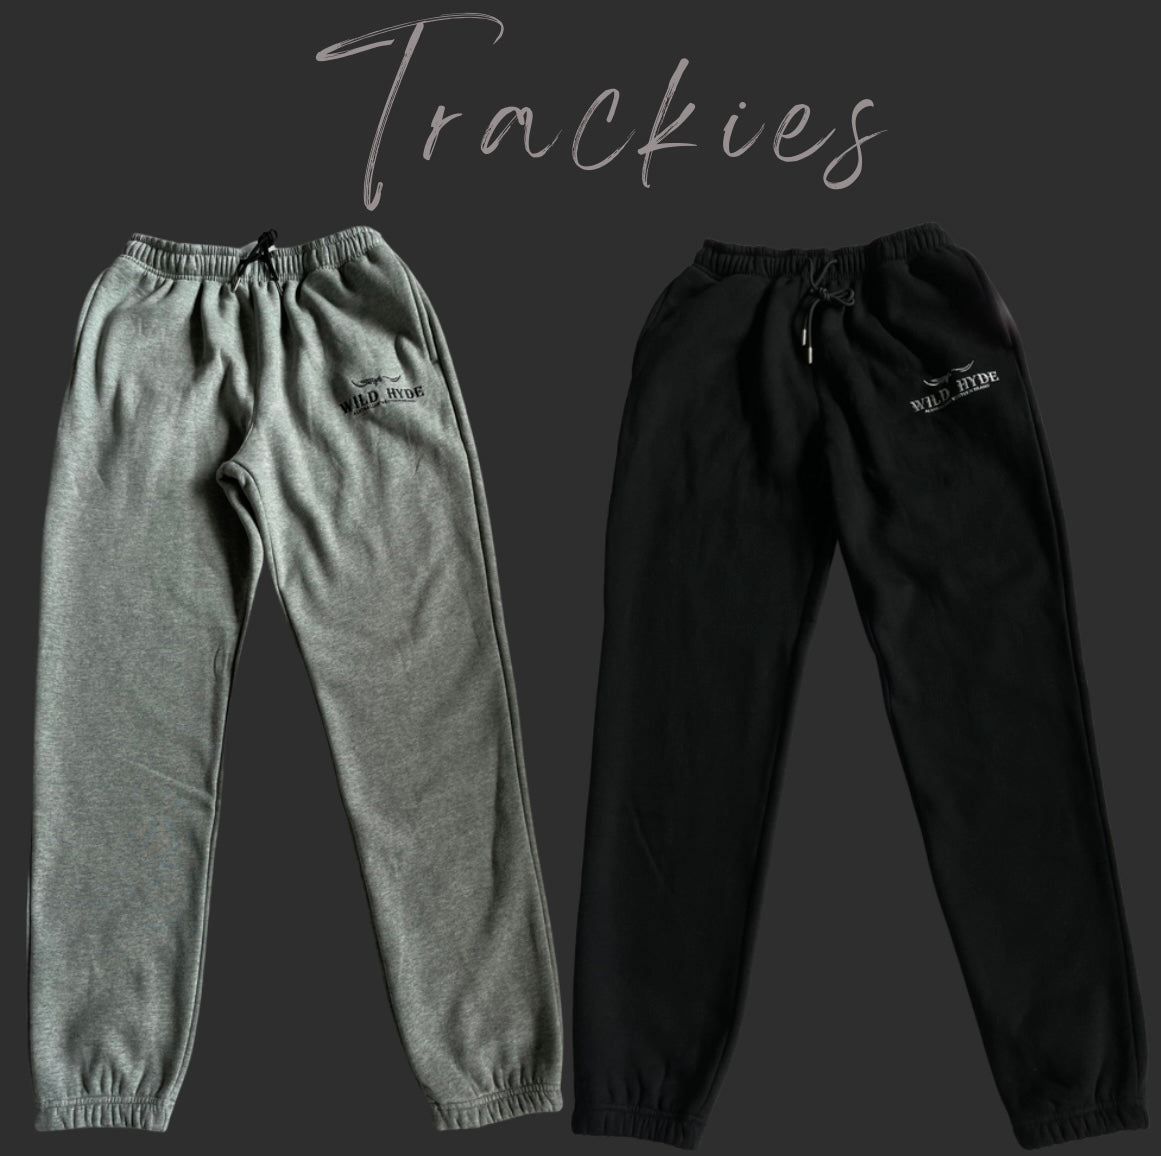 DUTTON Trackies